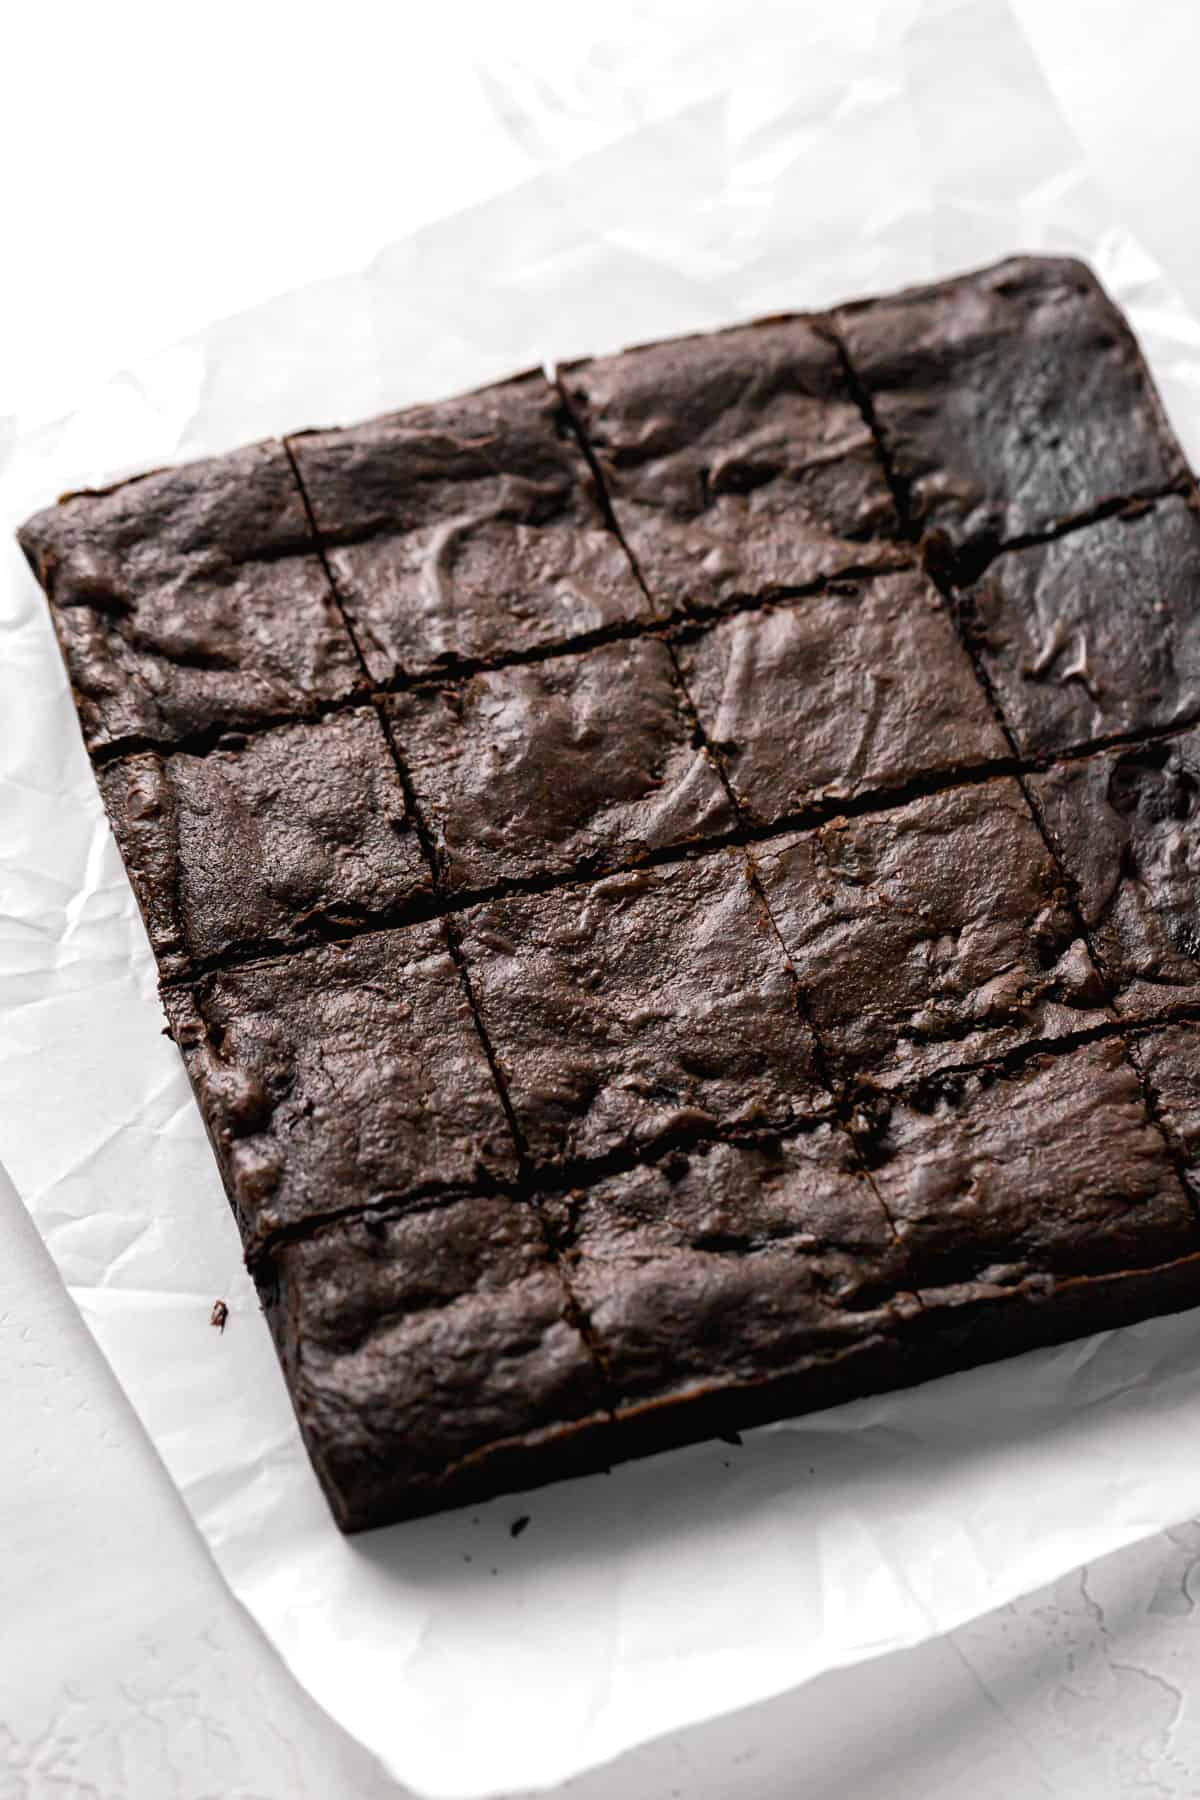 baked brownies cut into 16 squares on parchment paper.